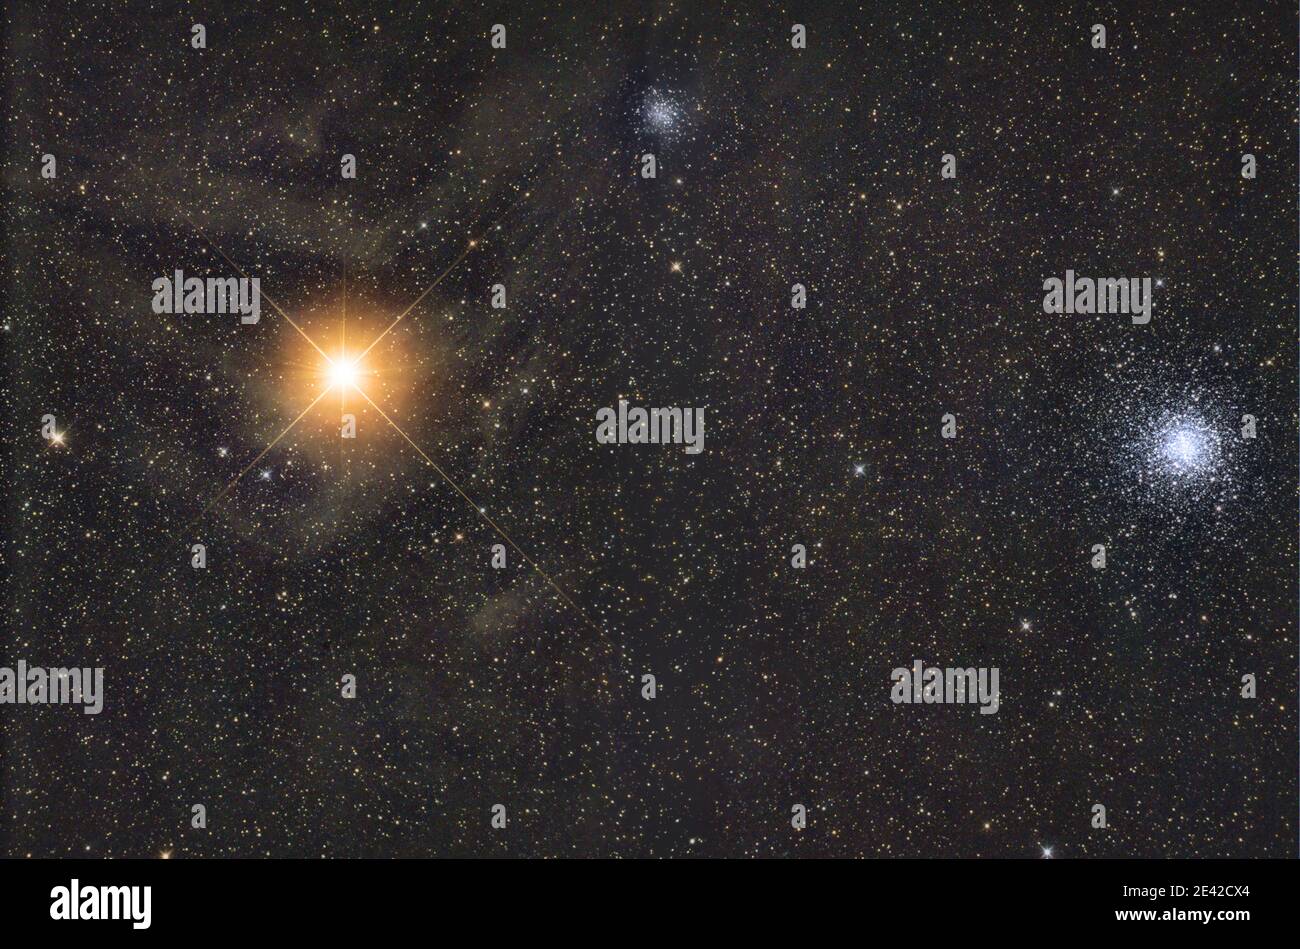 Antares star and M41 cluster Stock Photo